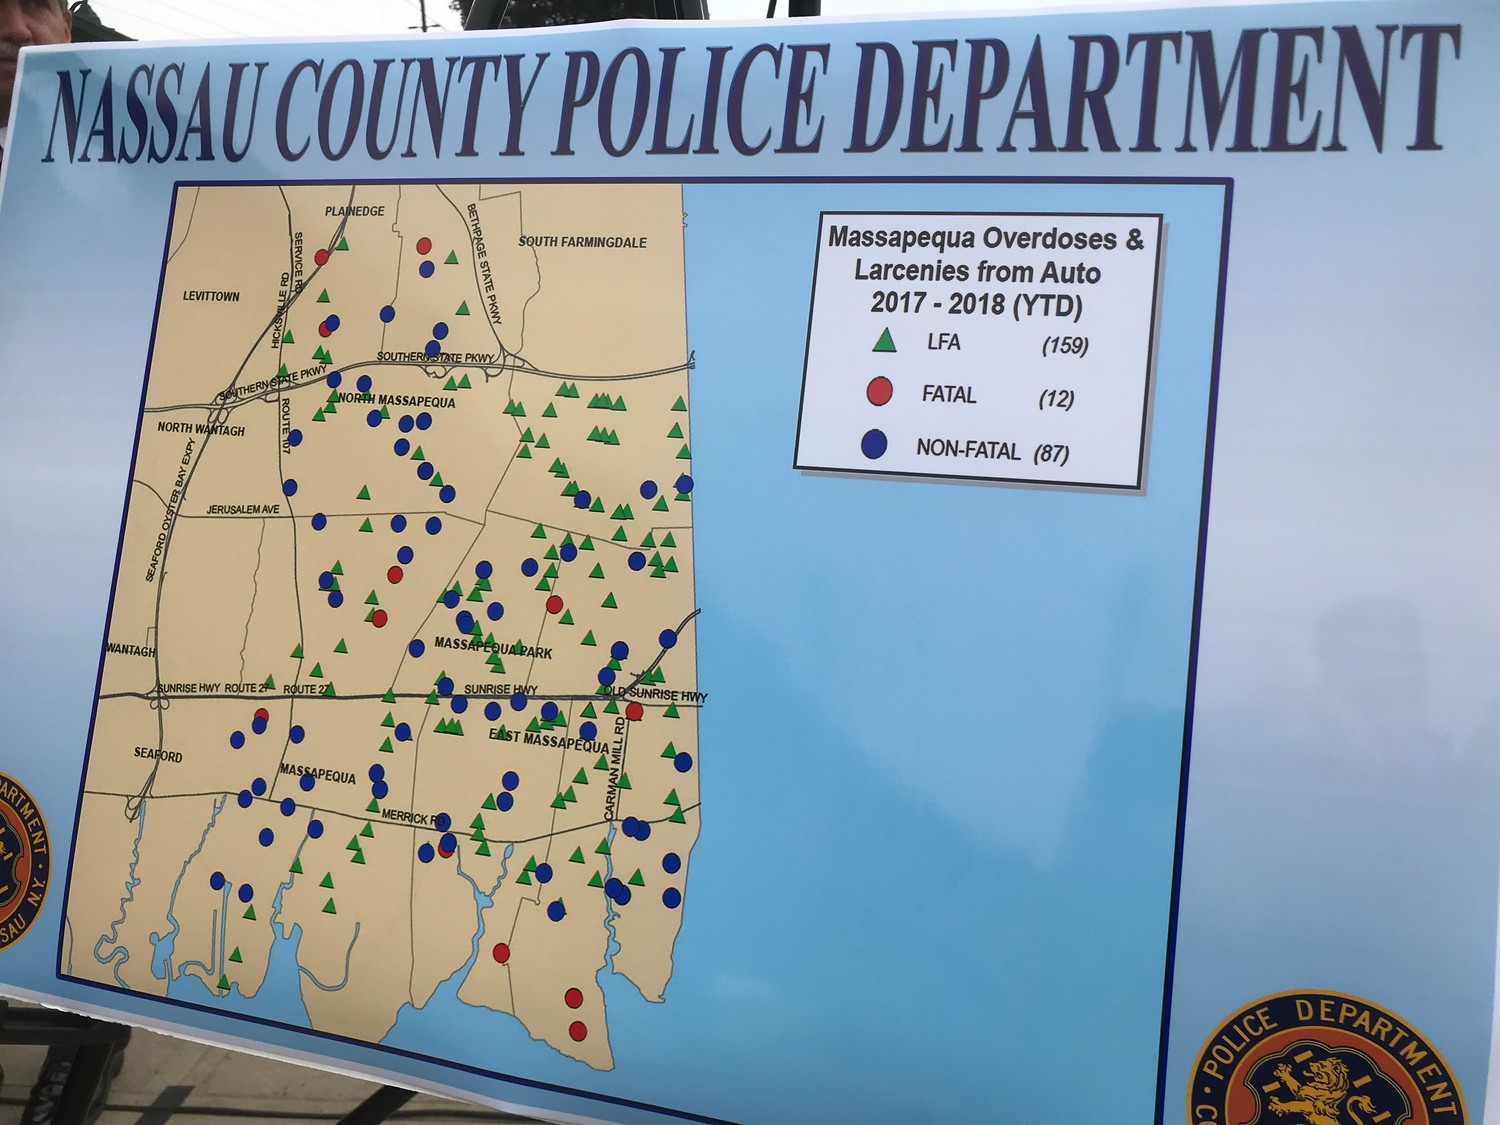 This map of Massapequa shows the information that OD Maps is giving the NCPD. The NCPD layer crimes on top of overdoses, and use to find correlations between crime and overdoses along with areas with a large number of overdose incidents.